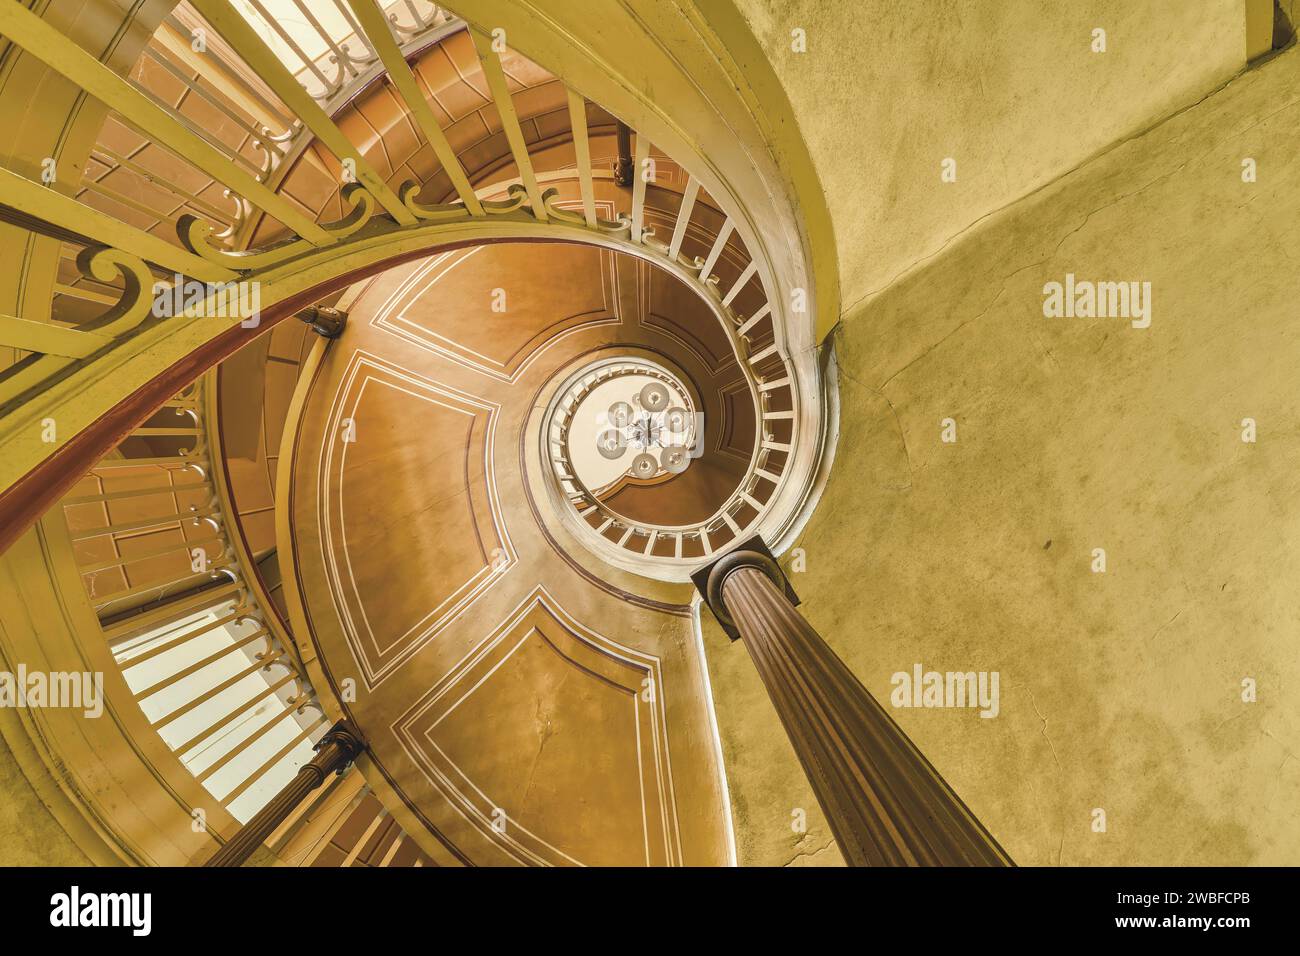 Impressive perspective of a spiral staircase with an oval course and lighting at the top, Schachtrupp Villa, Lost Place, Osterode am Harz, Lower Stock Photo